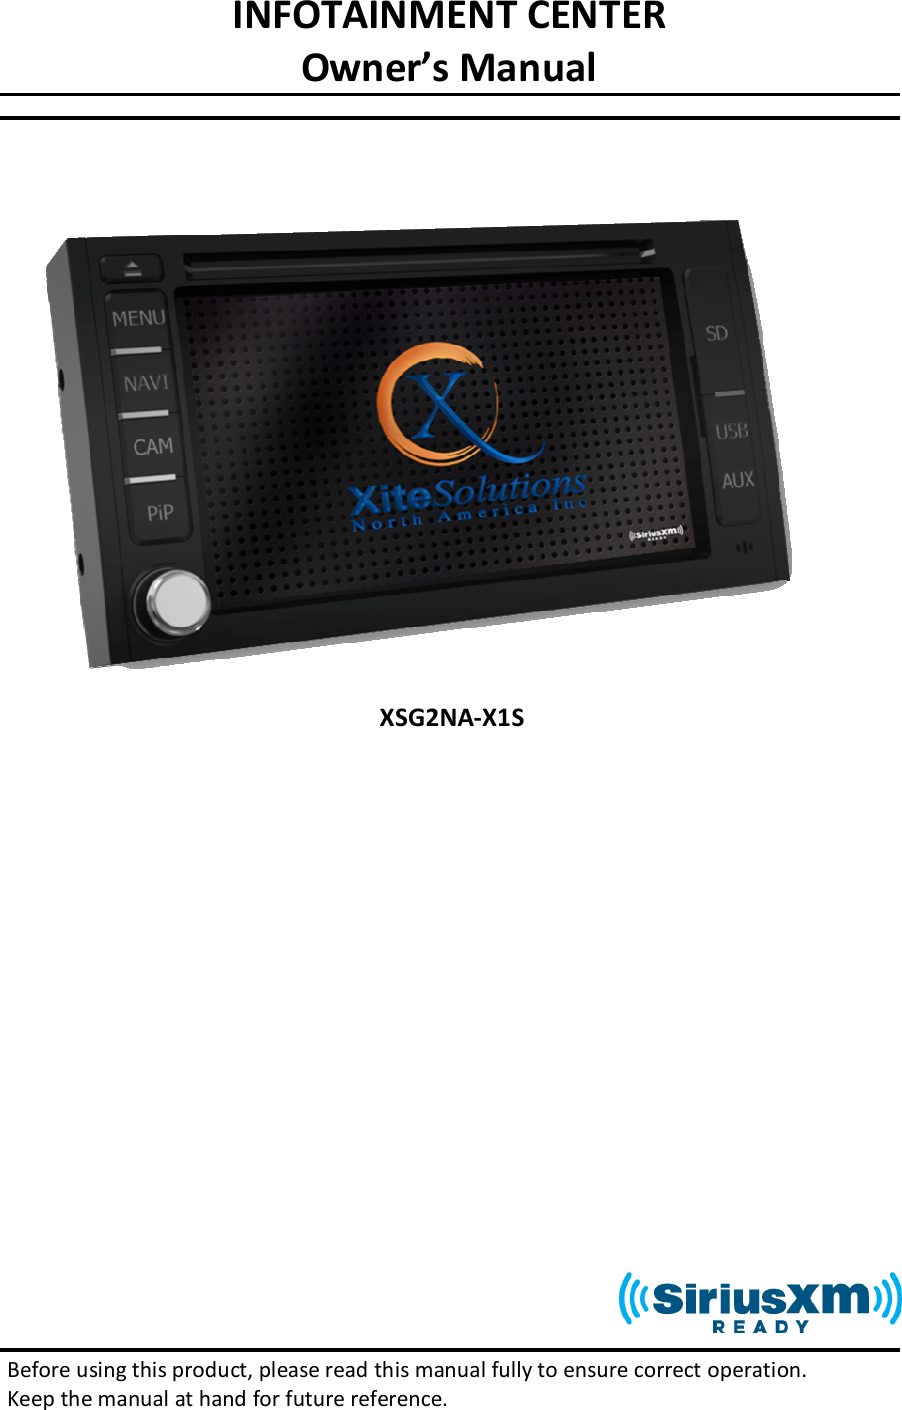 INFOTAINMENT CENTER Owner’s Manual                         Before using this product, please read this manual fully to ensure correct operation.  Keep the manual at hand for future reference.XSG2NA-X1S 